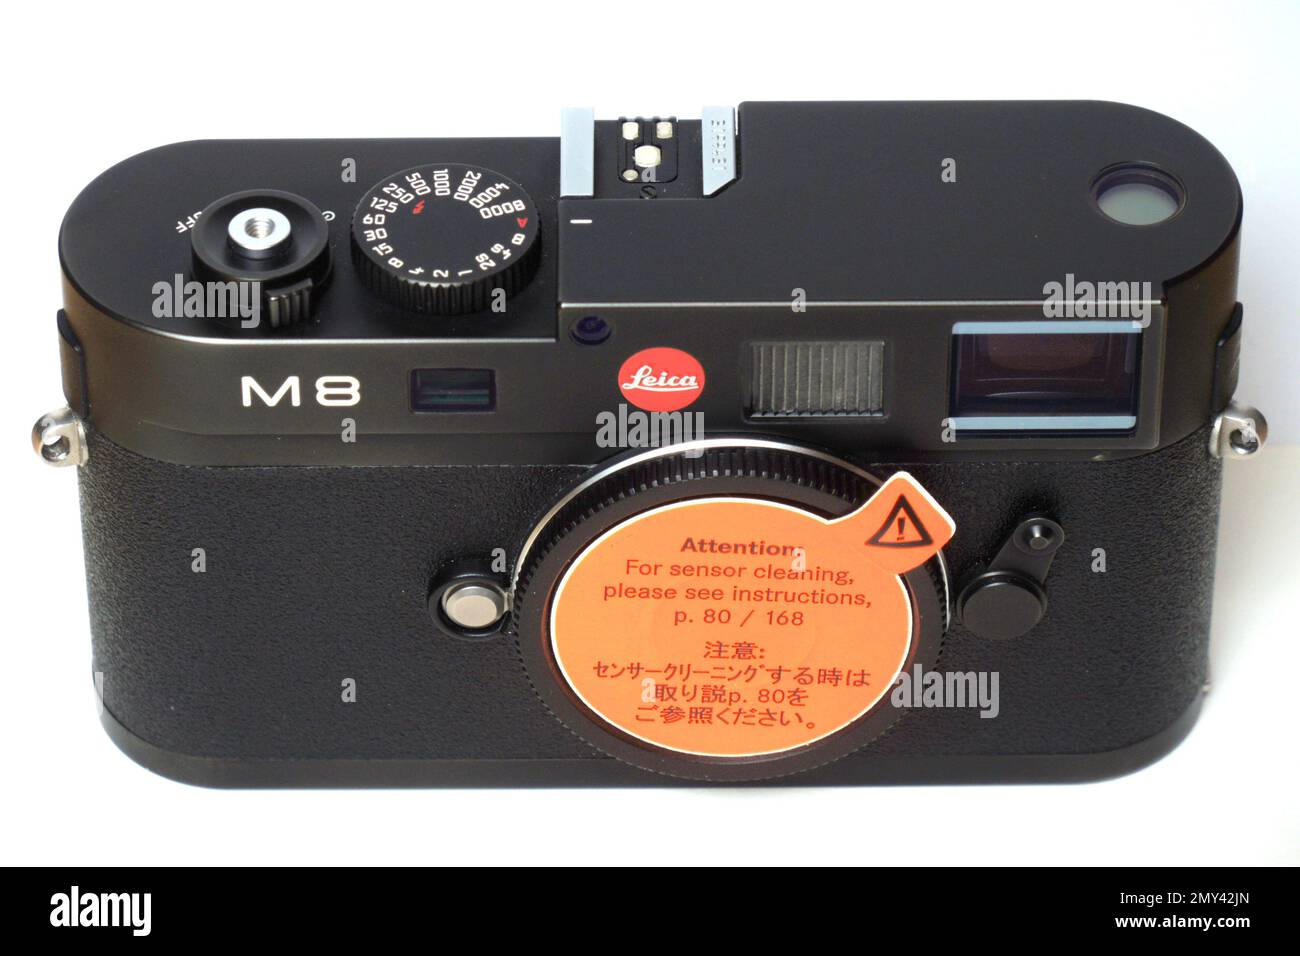 LEICA M8 - FIRST DIGITAL RANGEFINDER MADE BY LEICA WITH A 10,3 MPIX KODAK CCD  LAUNCHED IN 2006 - LEICA CAMERA - LEICA M © photography F.BEAUMONT Stock Photo